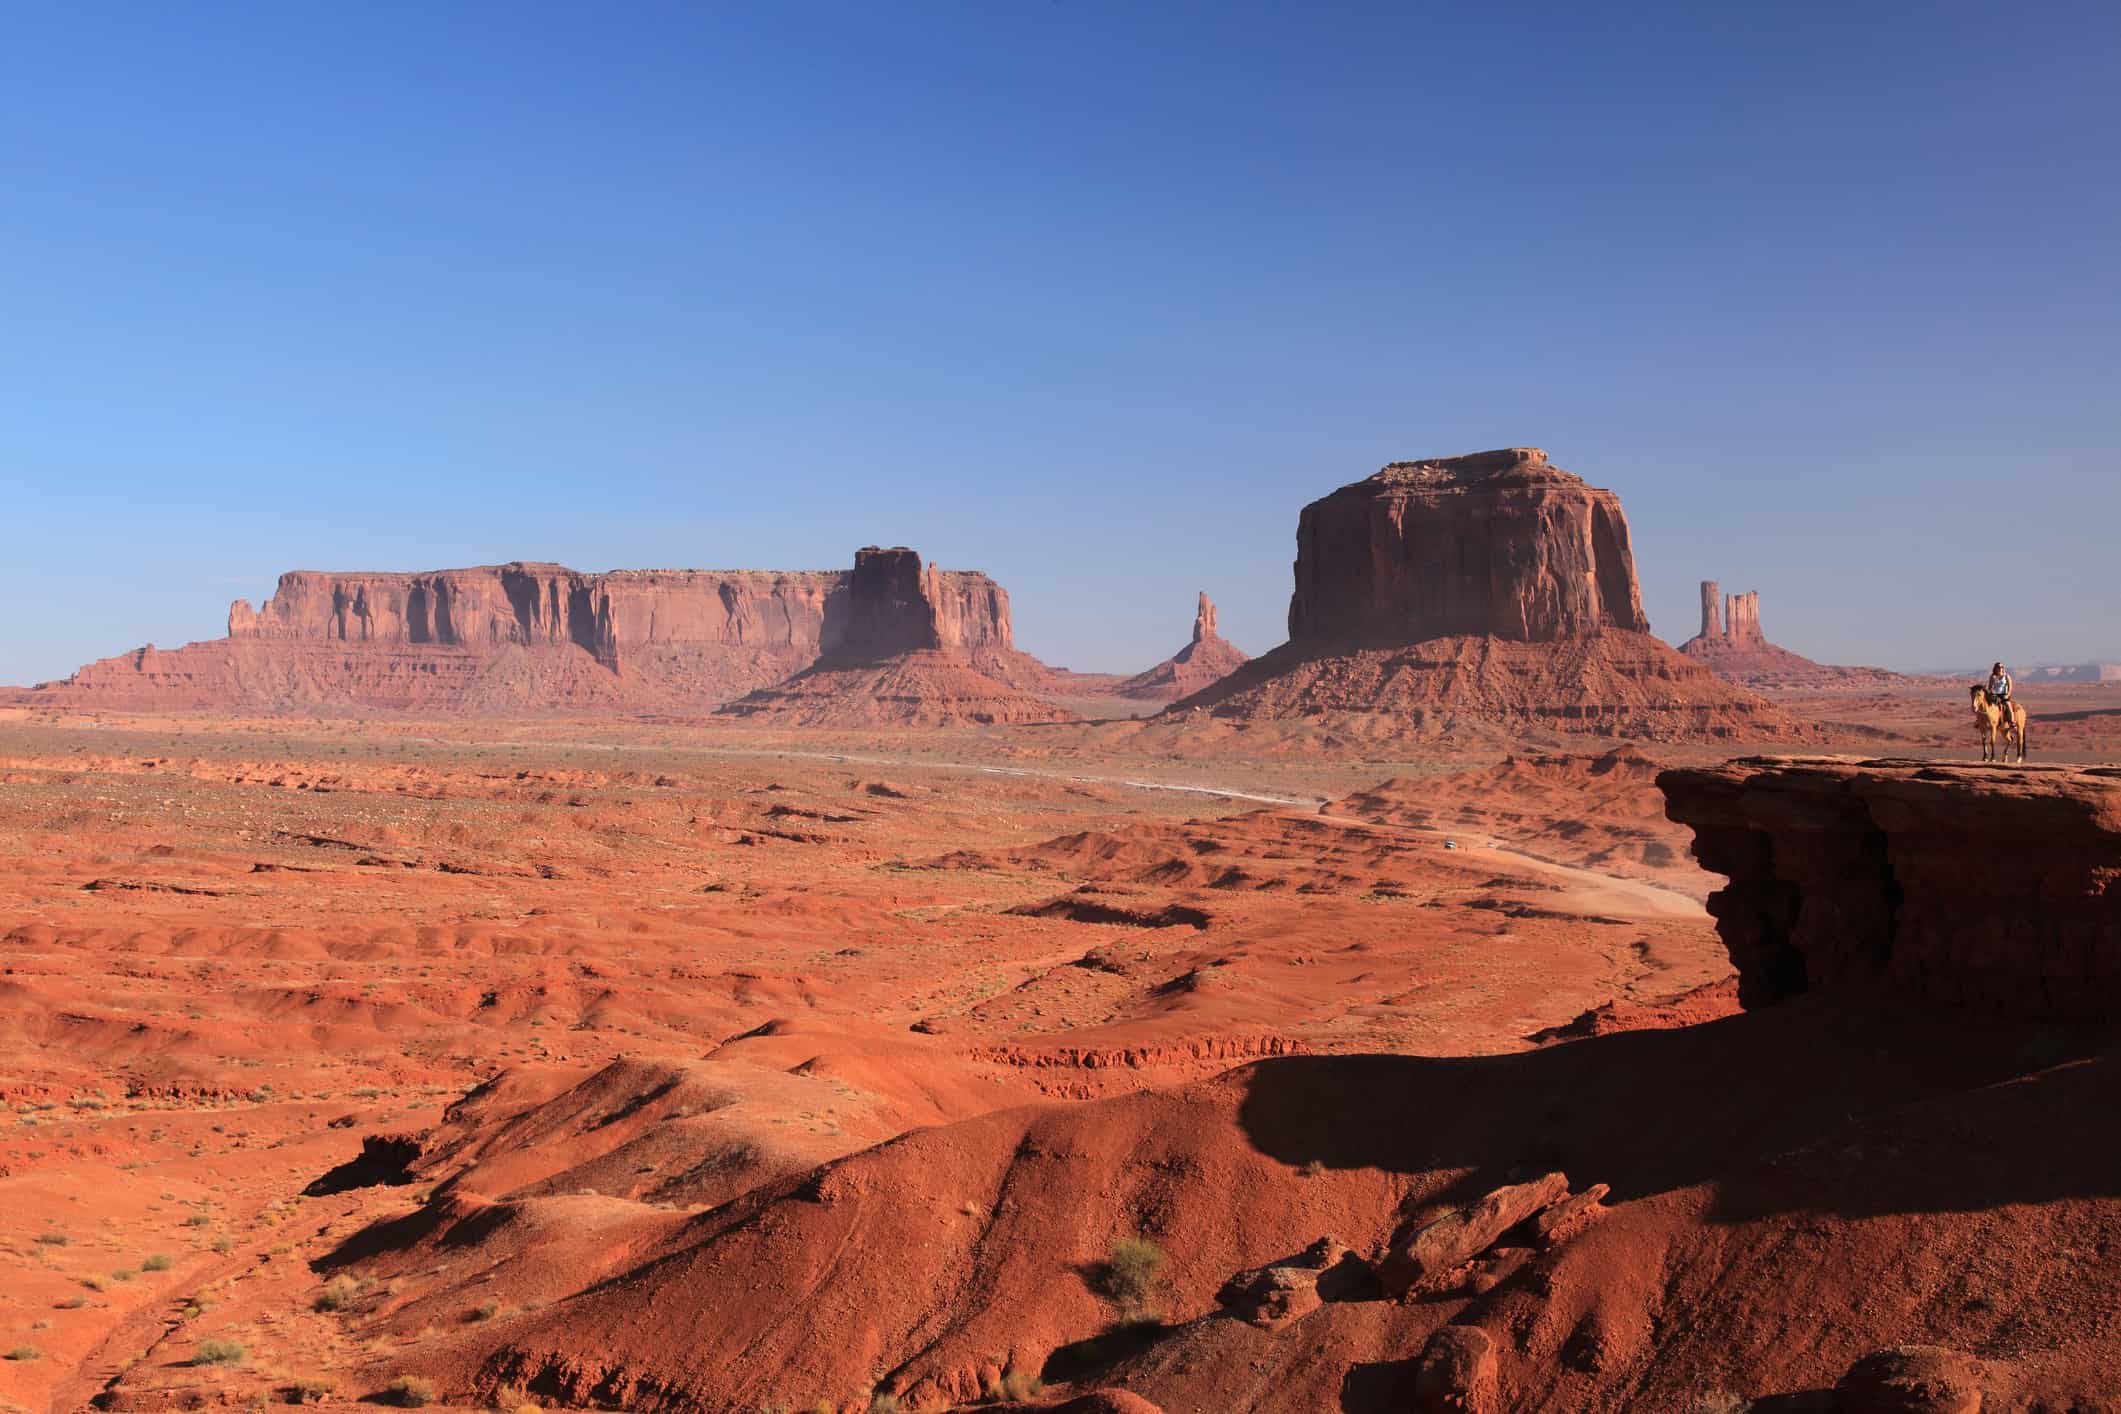 A woman riding on Horse from John Ford's Point overlook in Monument Valley Tribal Park in Arizona, USA